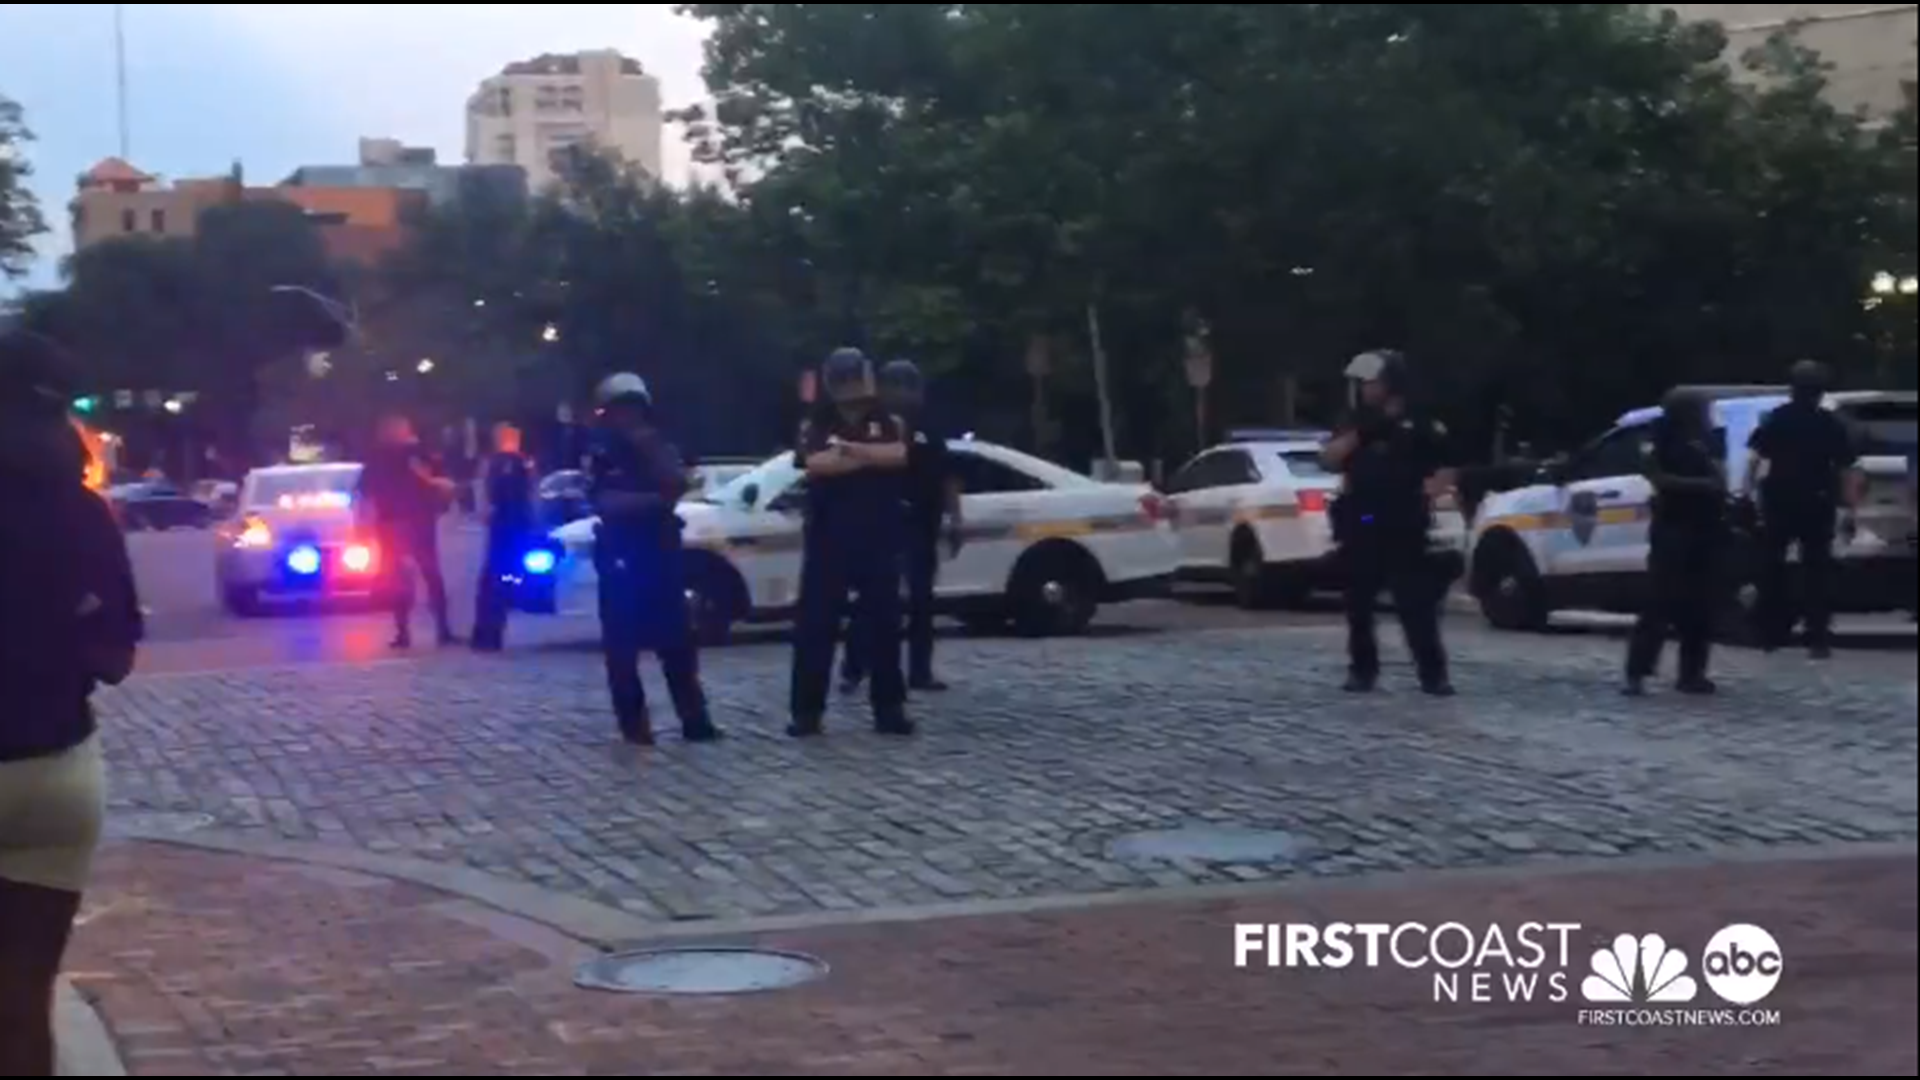 A protester told First Coast News Jacksonville police used tear gas and made at least one arrest during a protest downtown against police brutality.